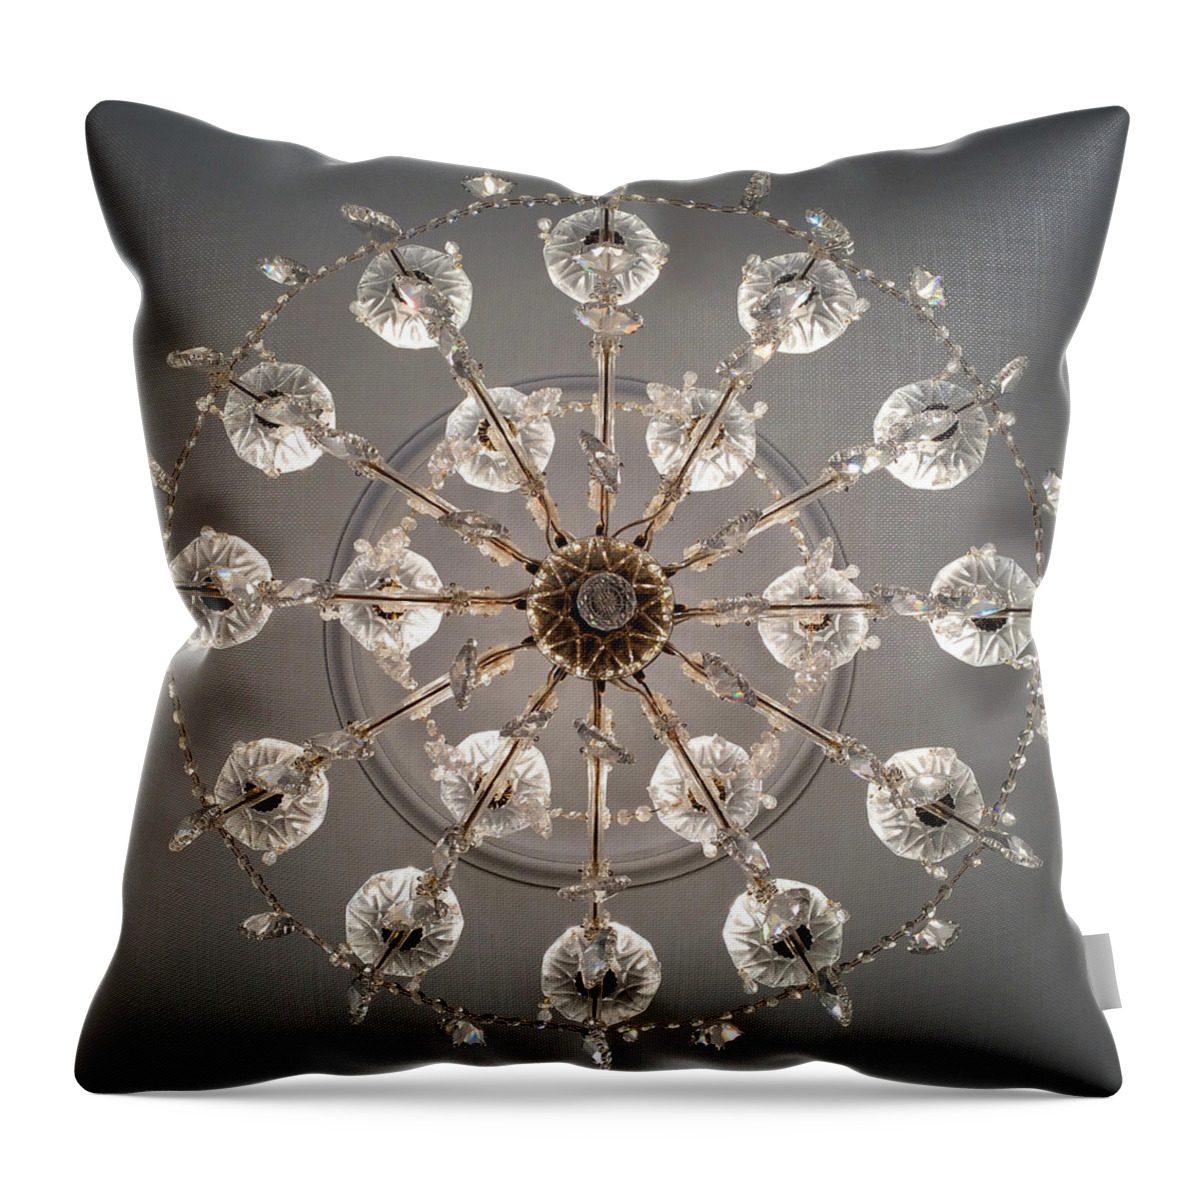 Chandelier Throw Pillow featuring the photograph Kuzino Palace by Annette Hadley